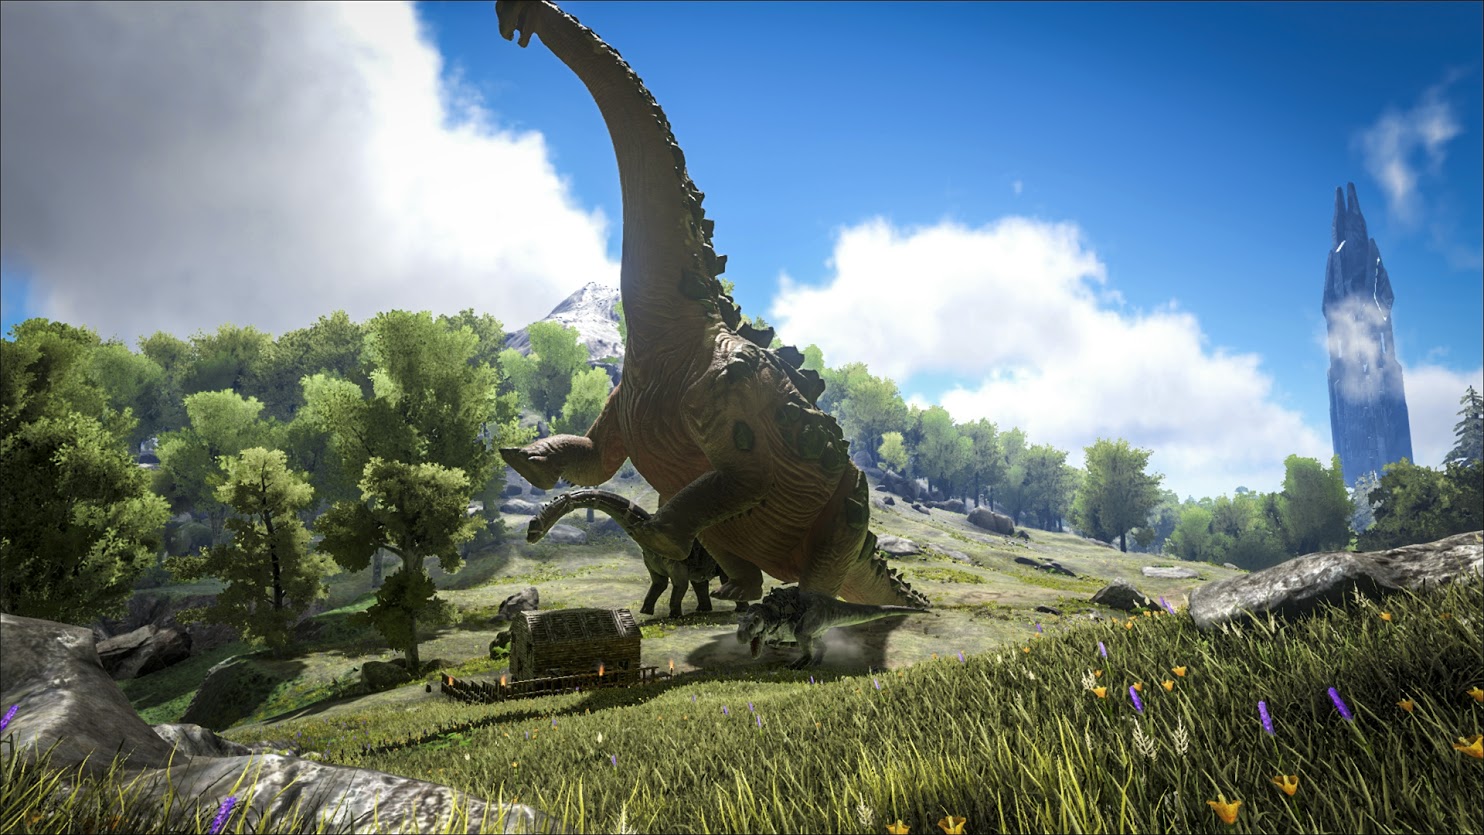 Ark: Survival Evolved is coming to mobile